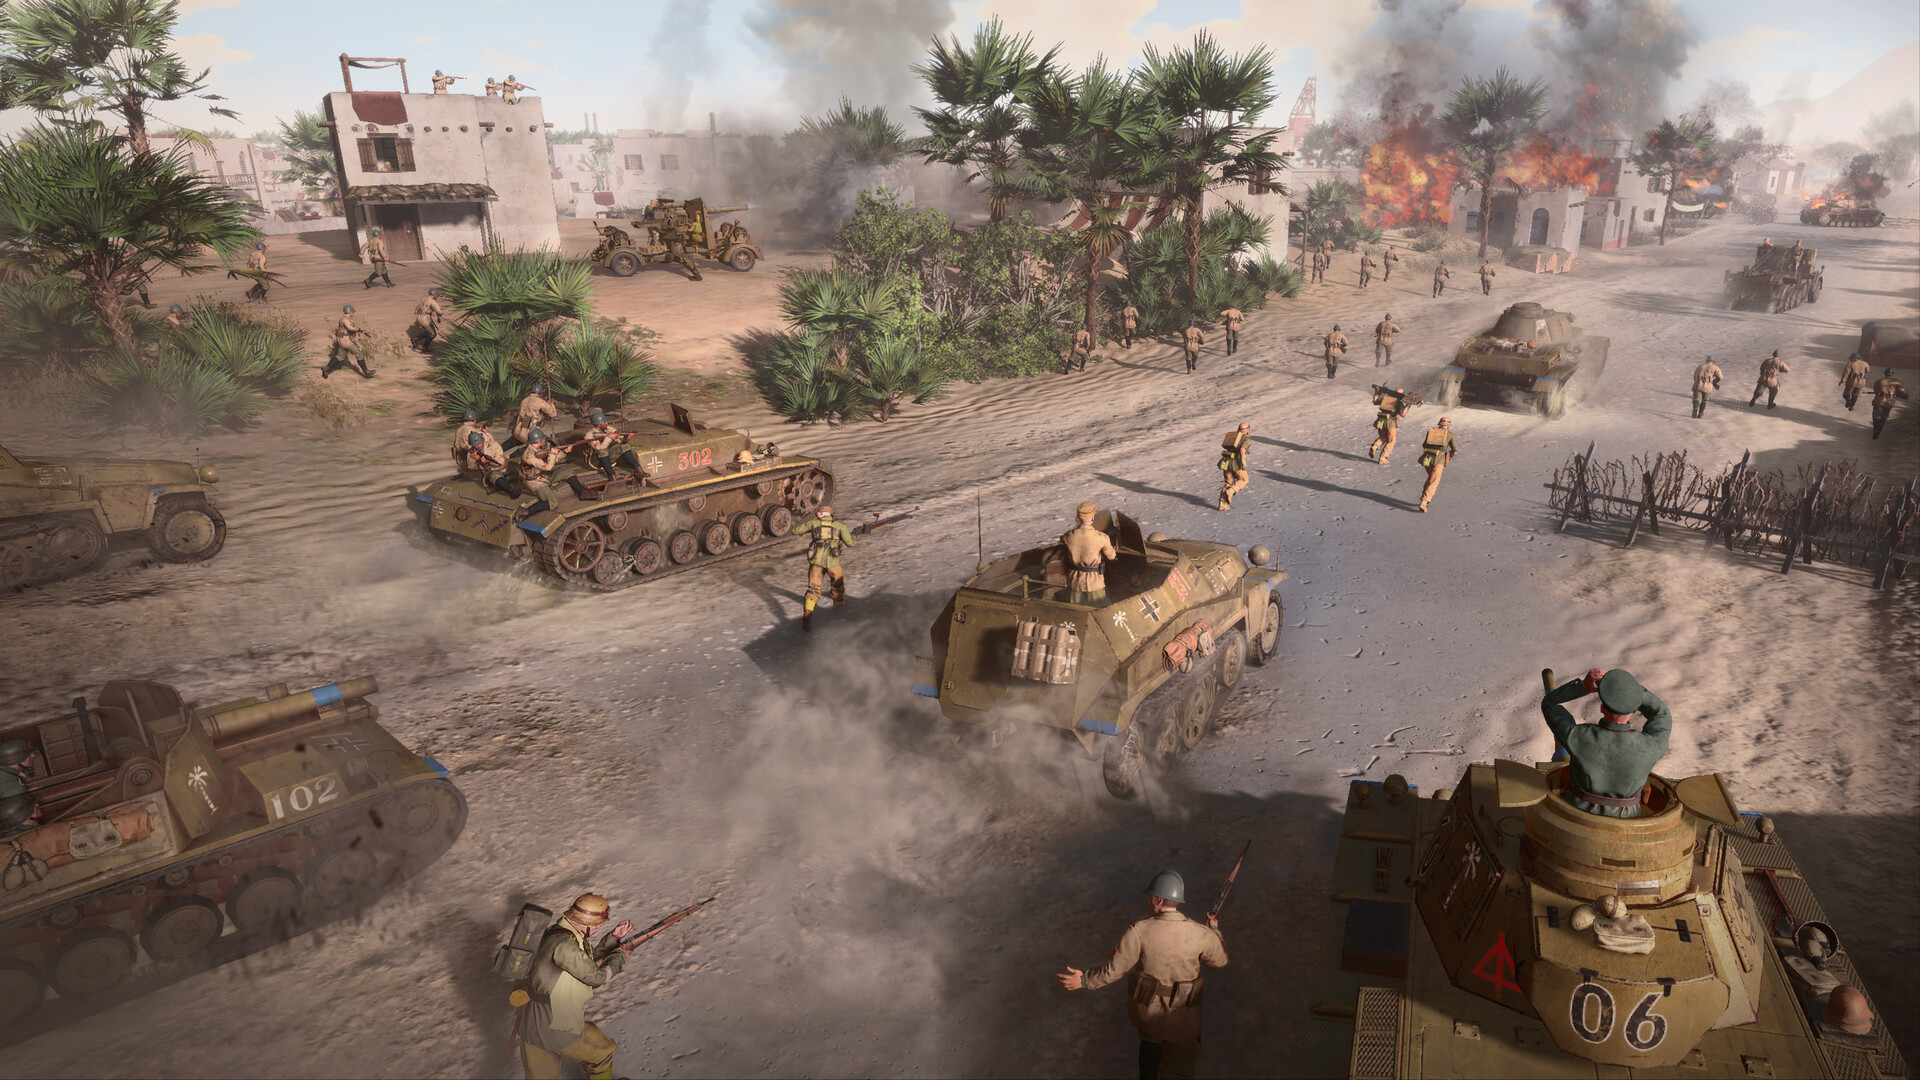 #
      Company of Heroes 3 delayed to February 23, 2023